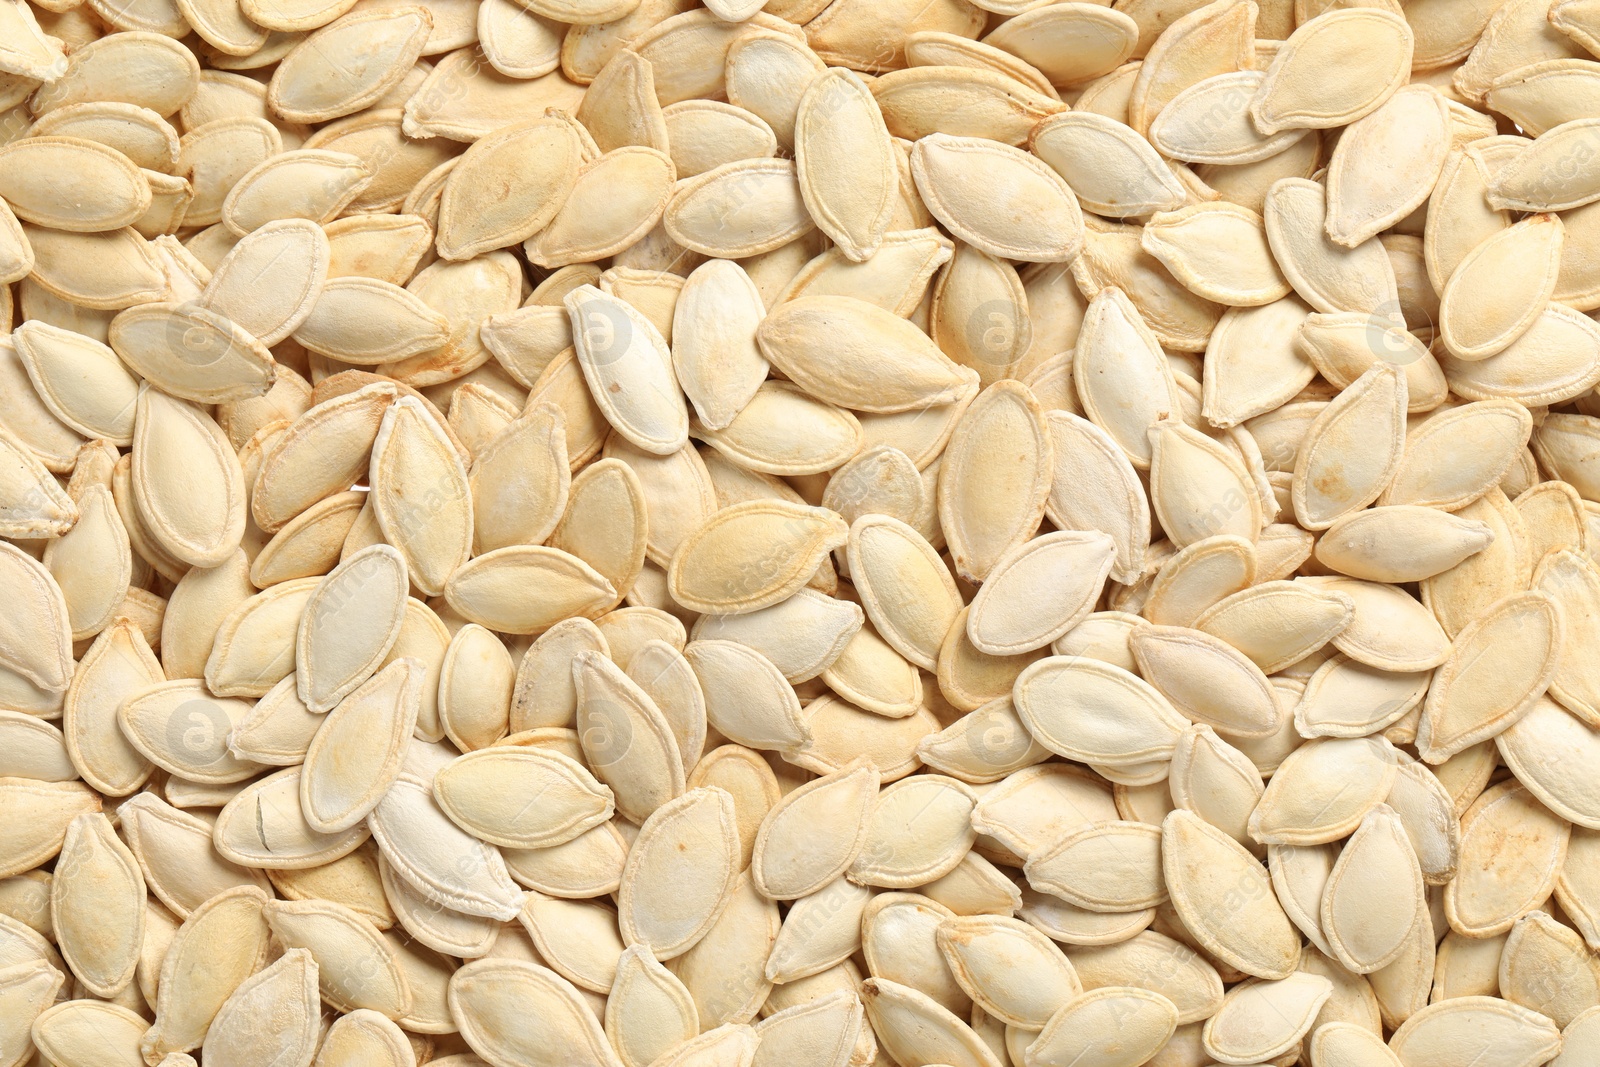 Photo of Many pumpkin seeds as background, top view